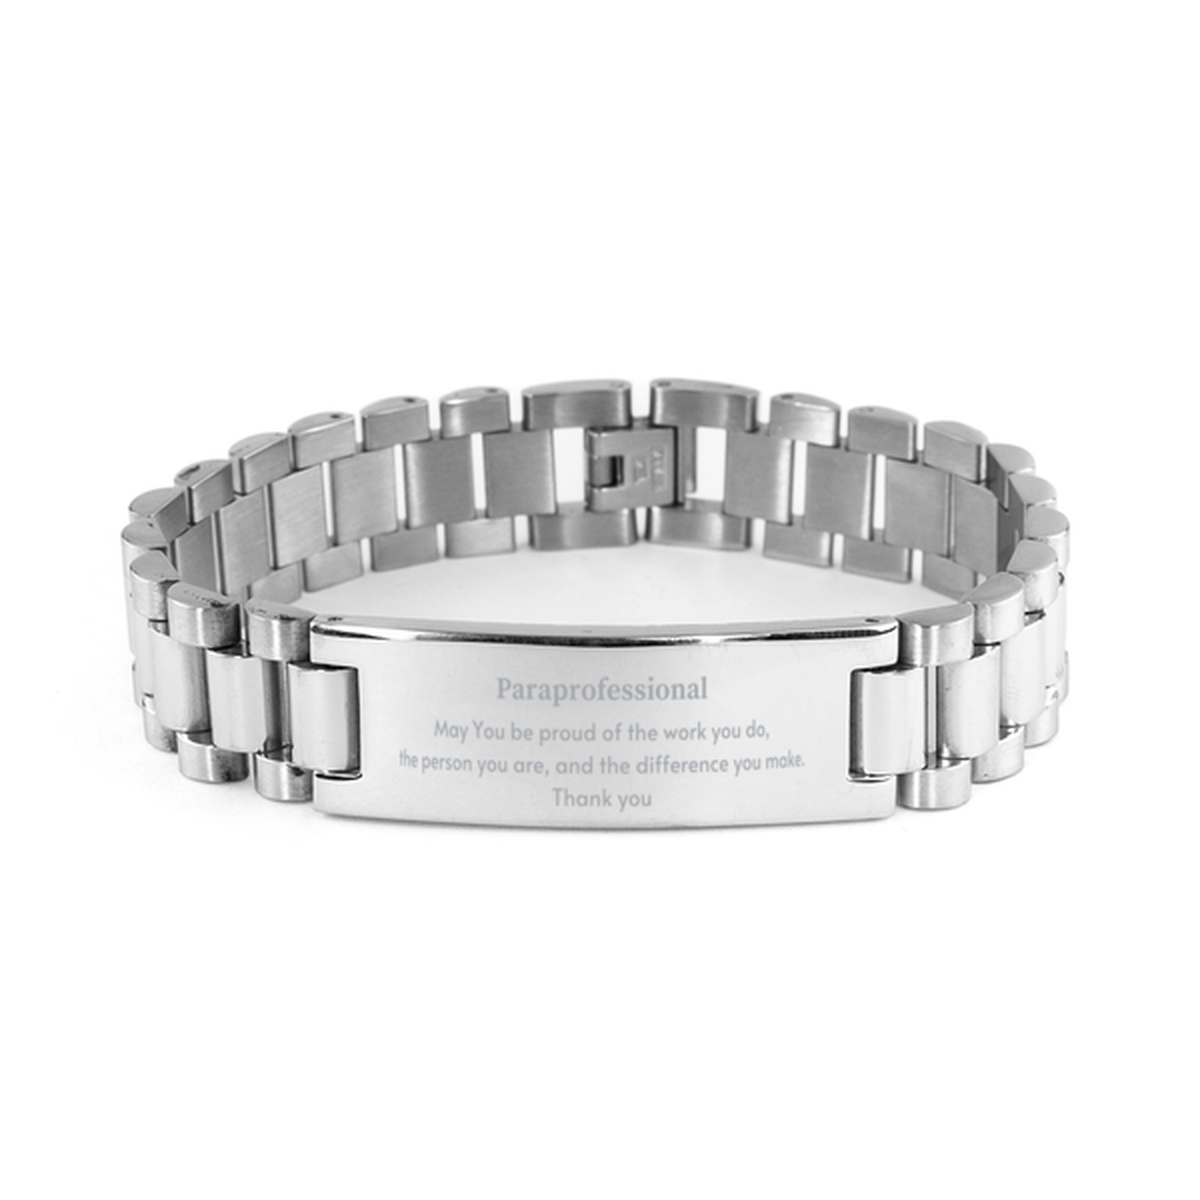 Heartwarming Ladder Stainless Steel Bracelet Retirement Coworkers Gifts for Paraprofessional, Paraprofessional May You be proud of the work you do, the person you are Gifts for Boss Men Women Friends